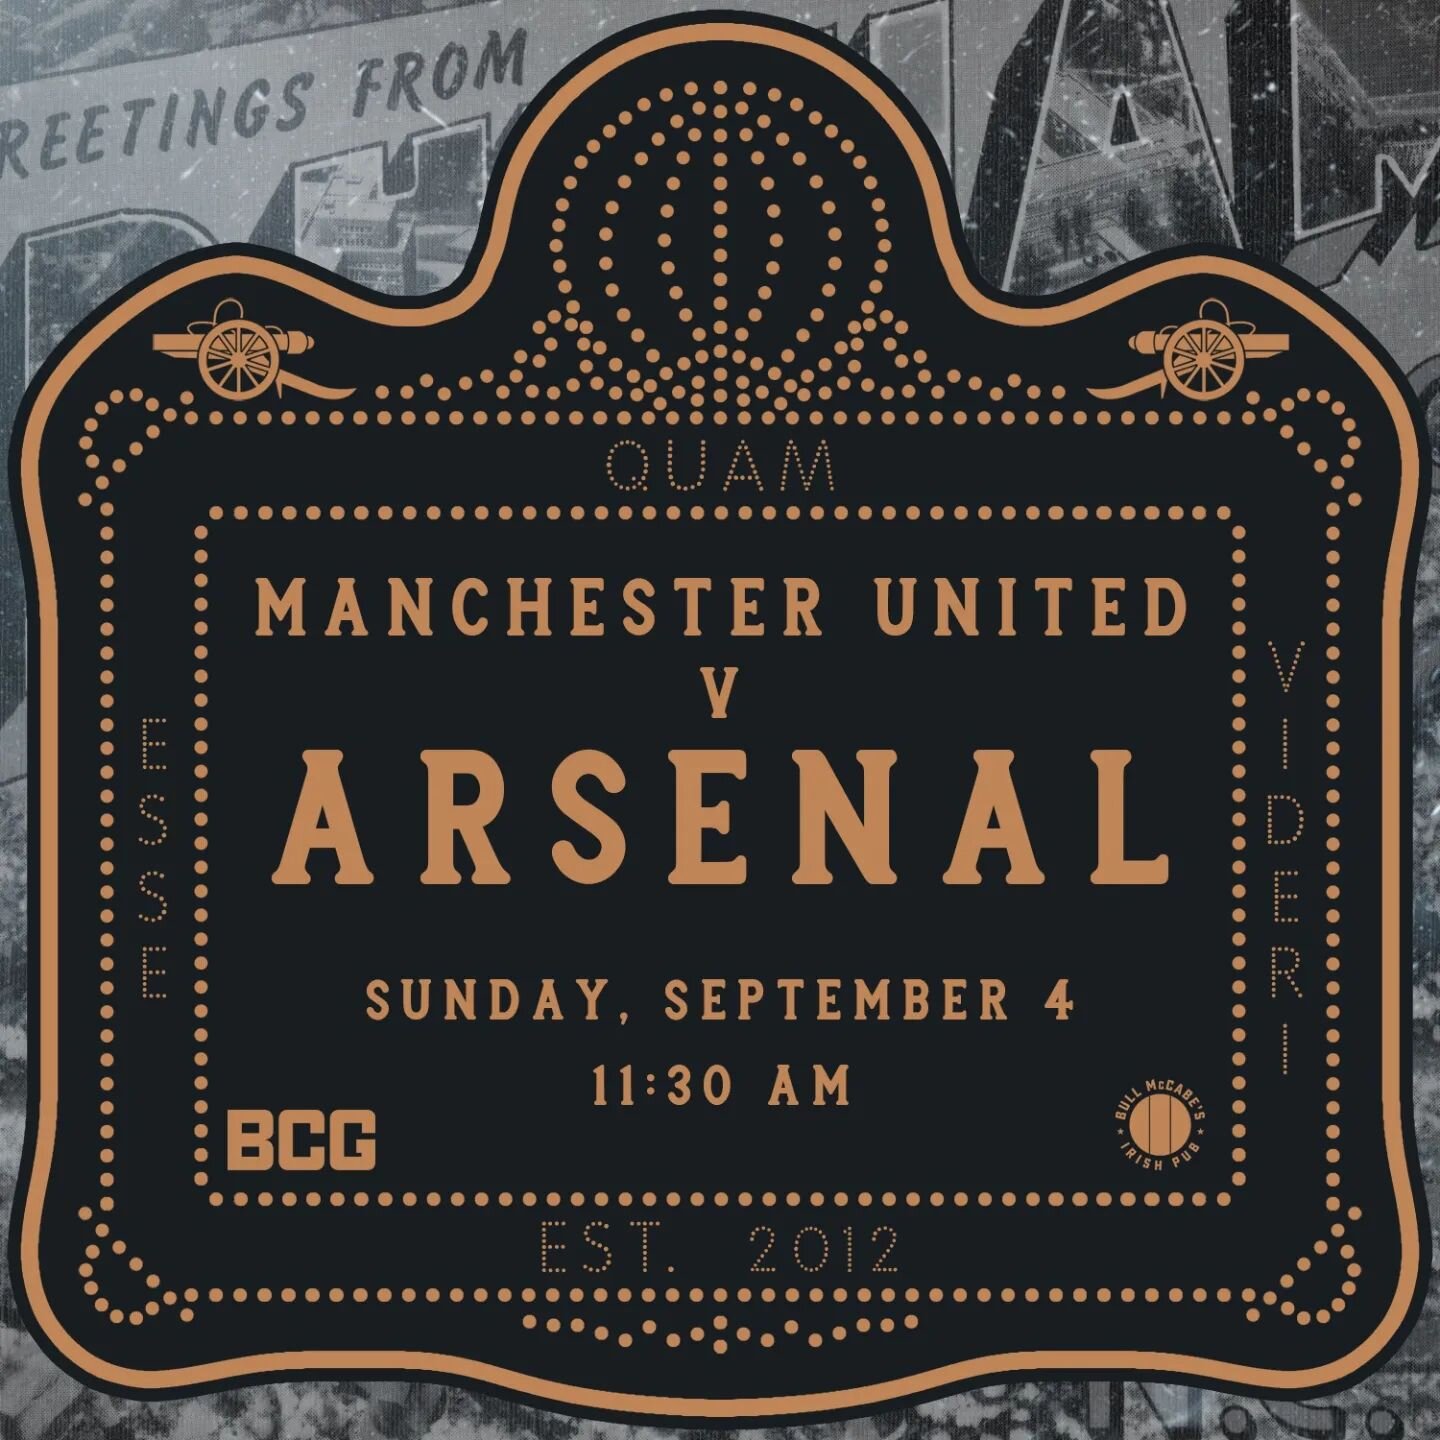 The Gunners are headed North to Old Trafford this Sunday at 11:30 EST, come watch with us in Durham at @bullmccabesdnc